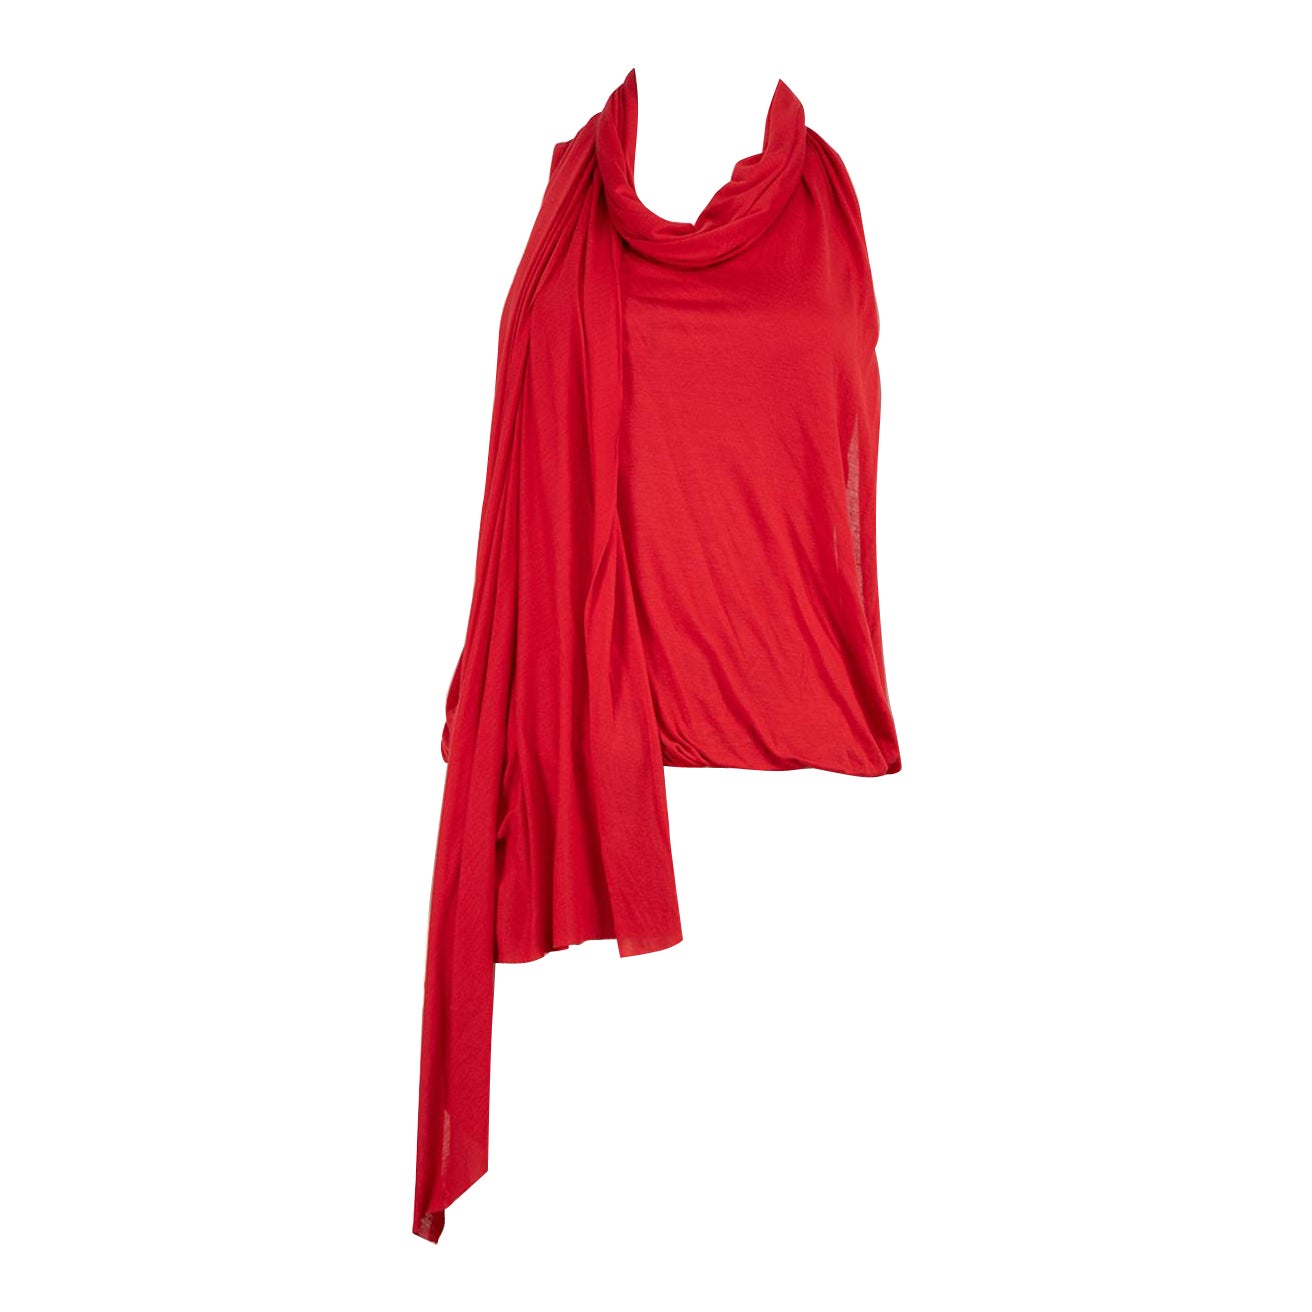 Alexander McQueen Red Draped Scarf Tank Top Size S